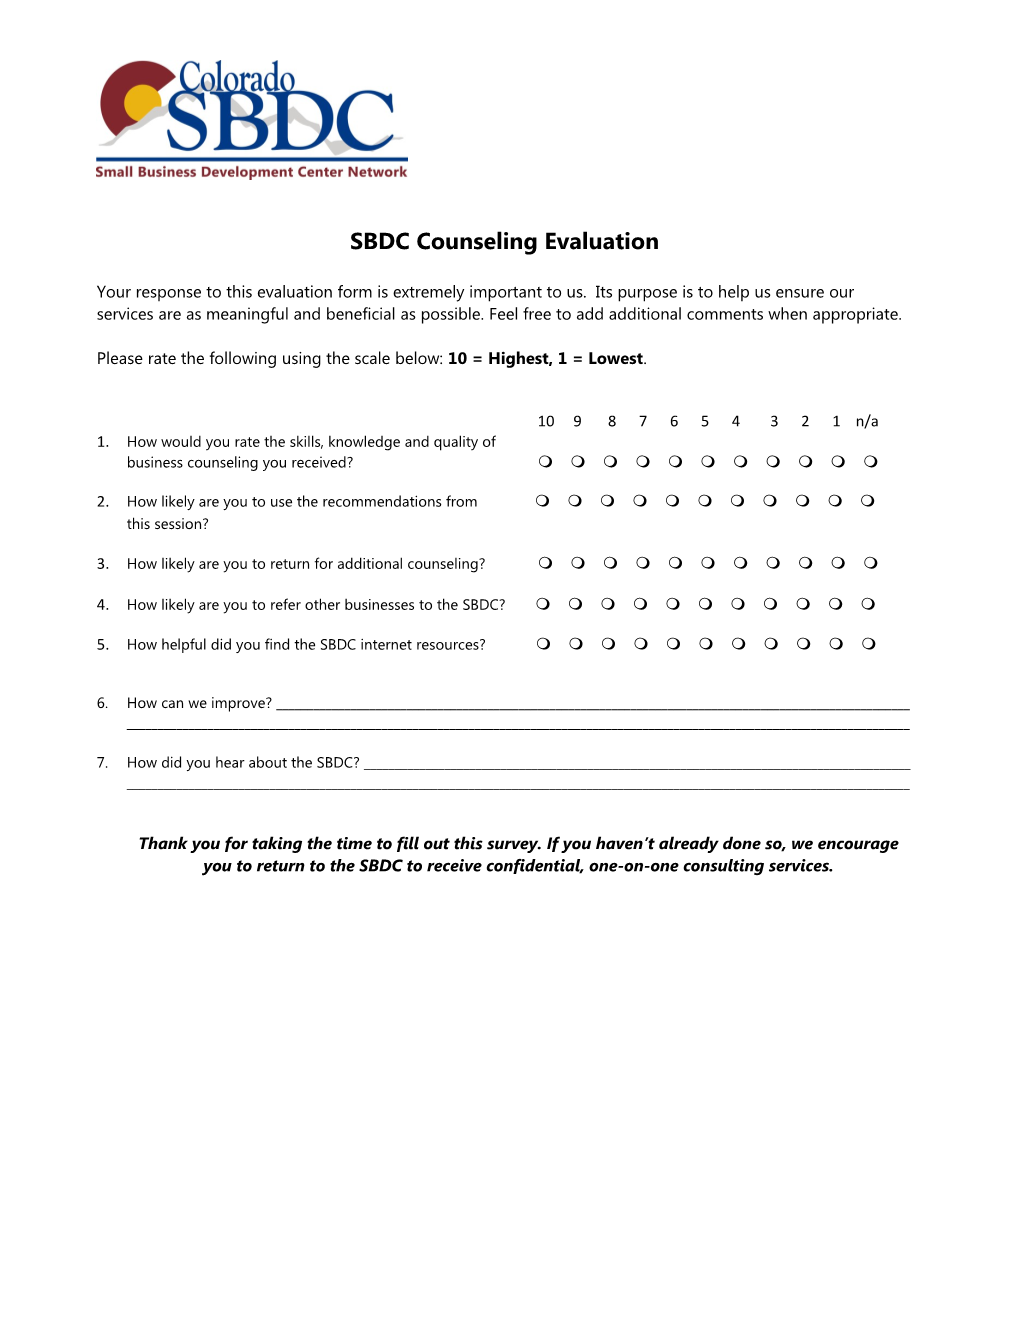 SBDC Counseling Evaluation